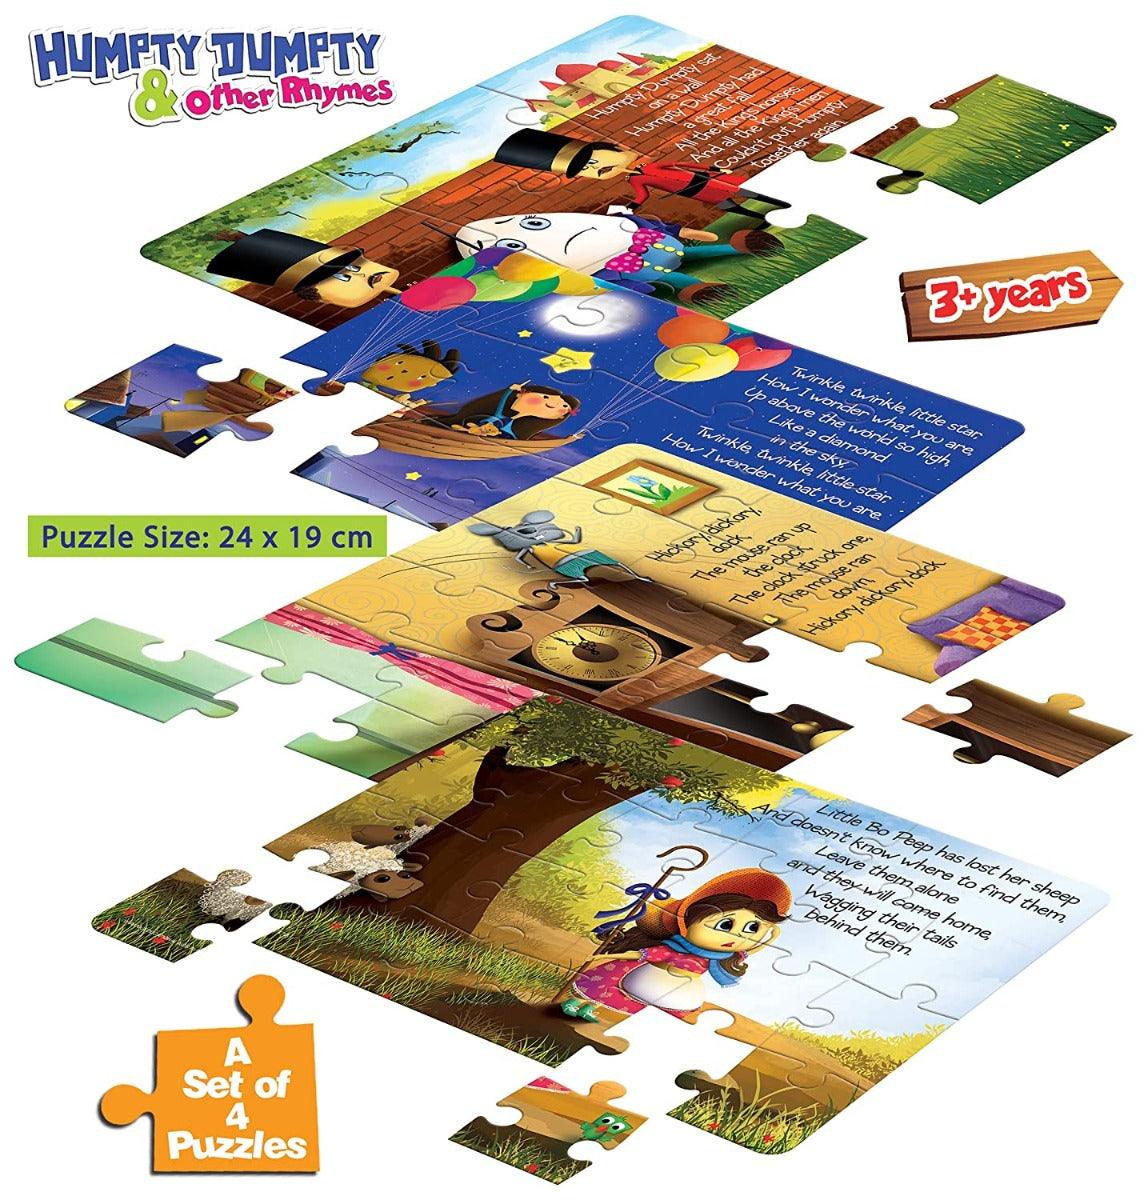 Frank Humpty Dumpty & Other Rhymes Puzzle - A Set of 4 Jigsaw Puzzles for 3 Year Old Kids and Above